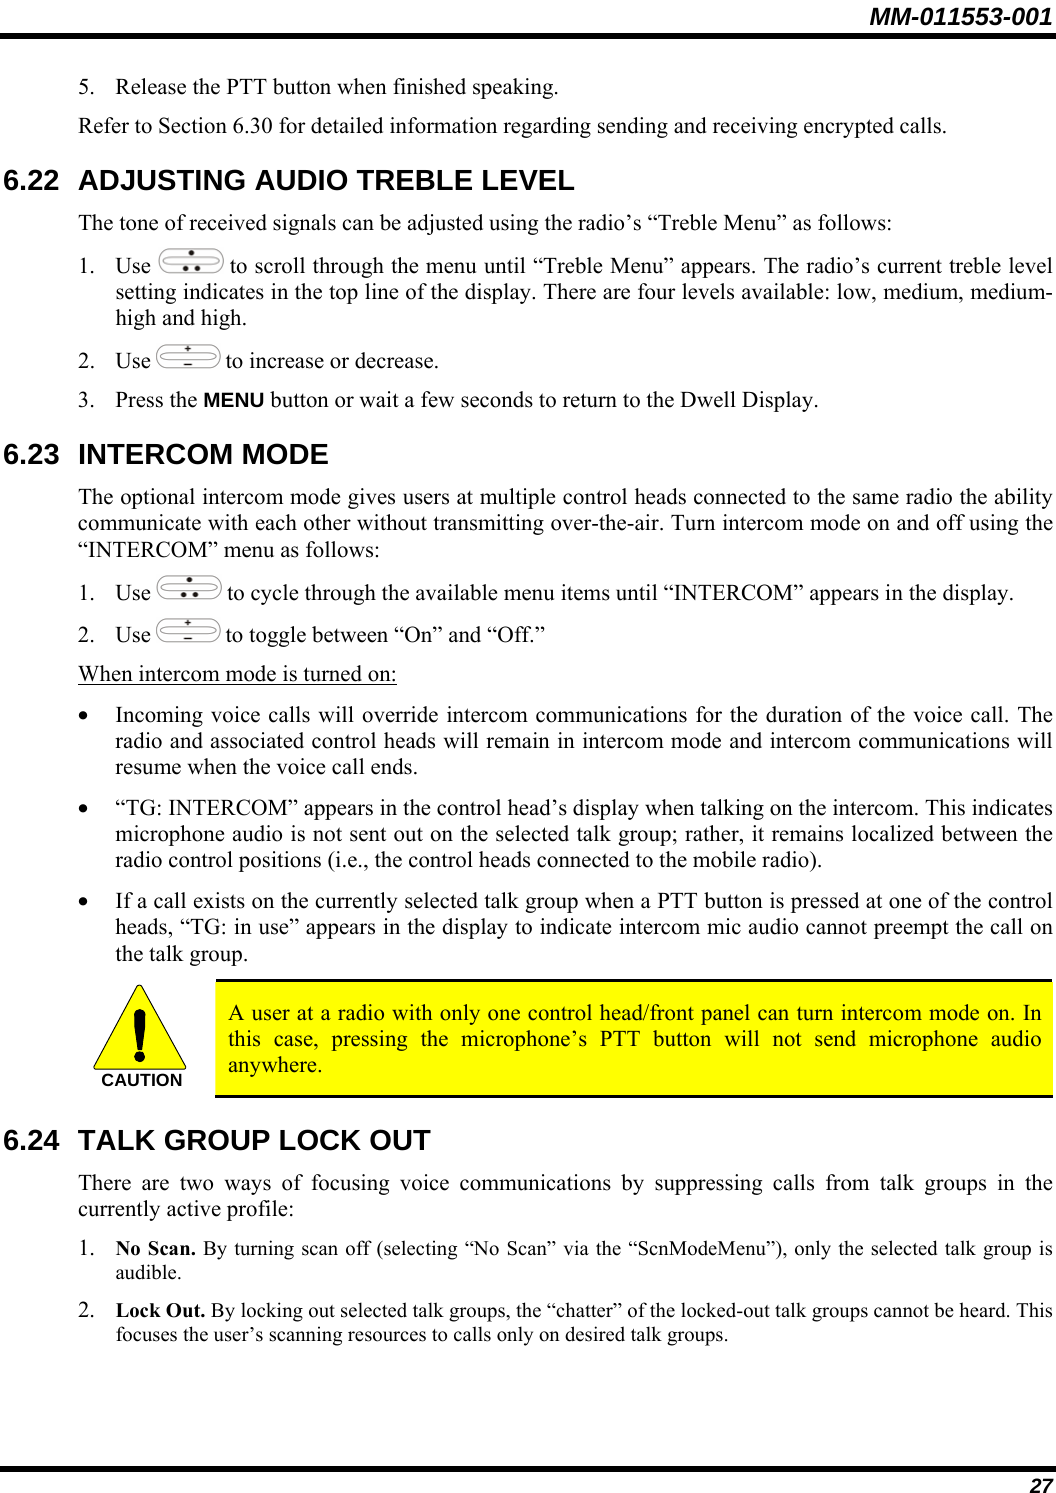 MM-011553-001 5. Release the PTT button when finished speaking. Refer to Section 6.30 for detailed information regarding sending and receiving encrypted calls. 6.22  ADJUSTING AUDIO TREBLE LEVEL The tone of received signals can be adjusted using the radio’s “Treble Menu” as follows: 1. Use   to scroll through the menu until “Treble Menu” appears. The radio’s current treble level setting indicates in the top line of the display. There are four levels available: low, medium, medium-high and high. 2. Use   to increase or decrease. 3. Press the MENU button or wait a few seconds to return to the Dwell Display. 6.23 INTERCOM MODE The optional intercom mode gives users at multiple control heads connected to the same radio the ability communicate with each other without transmitting over-the-air. Turn intercom mode on and off using the “INTERCOM” menu as follows: 1. Use   to cycle through the available menu items until “INTERCOM” appears in the display. 2. Use   to toggle between “On” and “Off.” When intercom mode is turned on: • Incoming voice calls will override intercom communications for the duration of the voice call. The radio and associated control heads will remain in intercom mode and intercom communications will resume when the voice call ends. • “TG: INTERCOM” appears in the control head’s display when talking on the intercom. This indicates microphone audio is not sent out on the selected talk group; rather, it remains localized between the radio control positions (i.e., the control heads connected to the mobile radio). • If a call exists on the currently selected talk group when a PTT button is pressed at one of the control heads, “TG: in use” appears in the display to indicate intercom mic audio cannot preempt the call on the talk group. CAUTION  A user at a radio with only one control head/front panel can turn intercom mode on. In this case, pressing the microphone’s PTT button will not send microphone audio anywhere. 6.24  TALK GROUP LOCK OUT There are two ways of focusing voice communications by suppressing calls from talk groups in the currently active profile: 1. No Scan. By turning scan off (selecting “No Scan” via the “ScnModeMenu”), only the selected talk group is audible. 2. Lock Out. By locking out selected talk groups, the “chatter” of the locked-out talk groups cannot be heard. This focuses the user’s scanning resources to calls only on desired talk groups. 27 